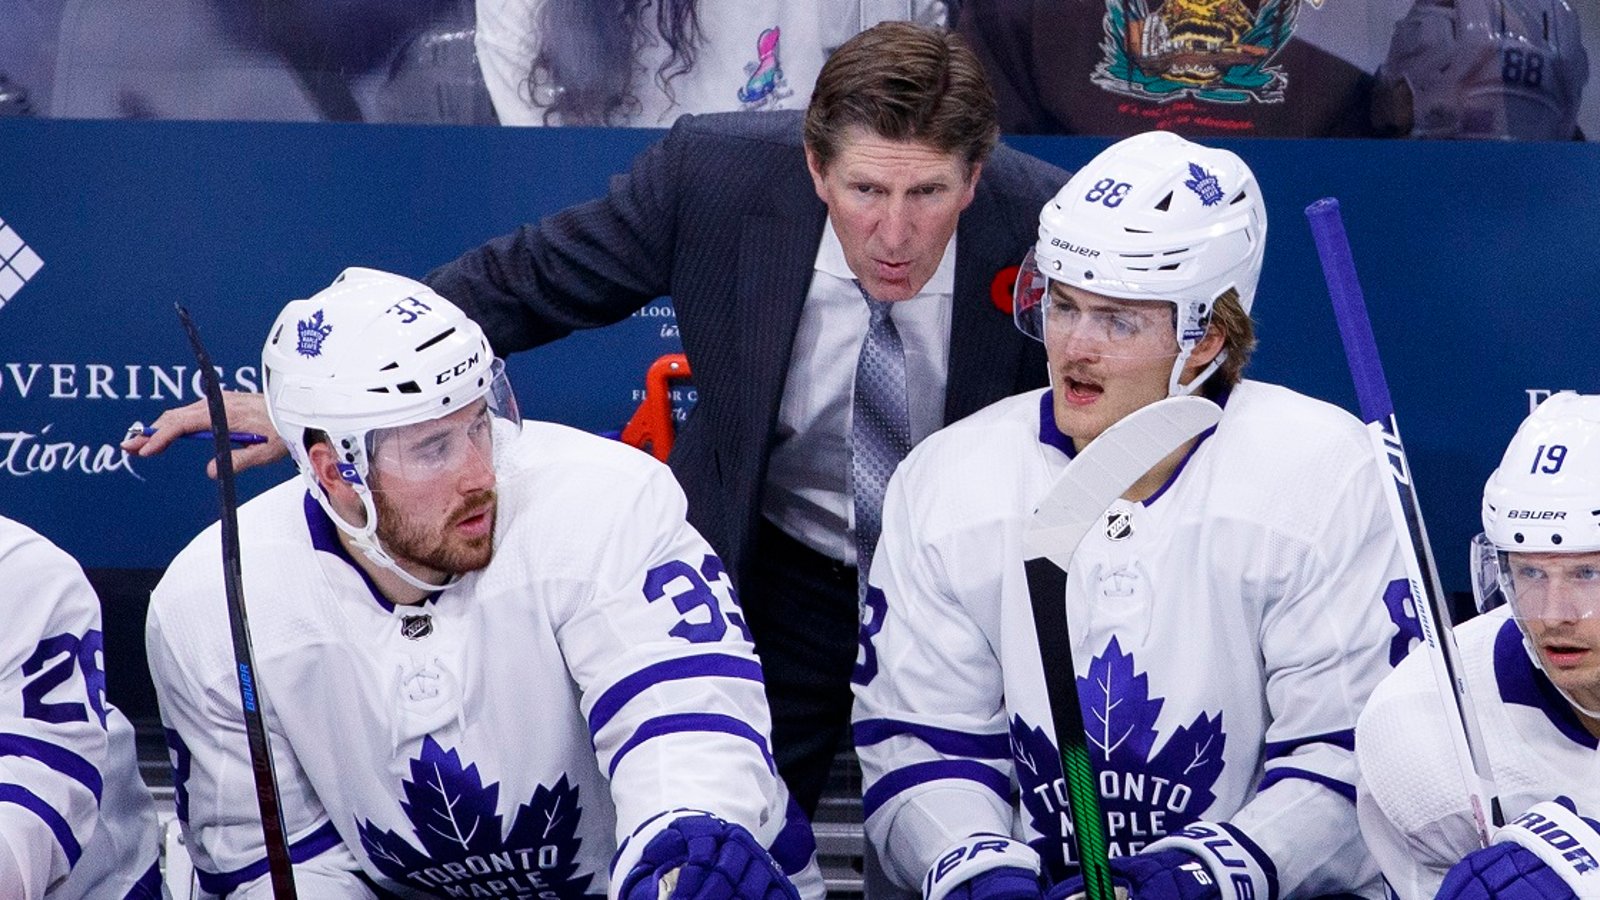 Maple Leafs may have created a “roadblock” for Mike Babcock's future in the NHL.